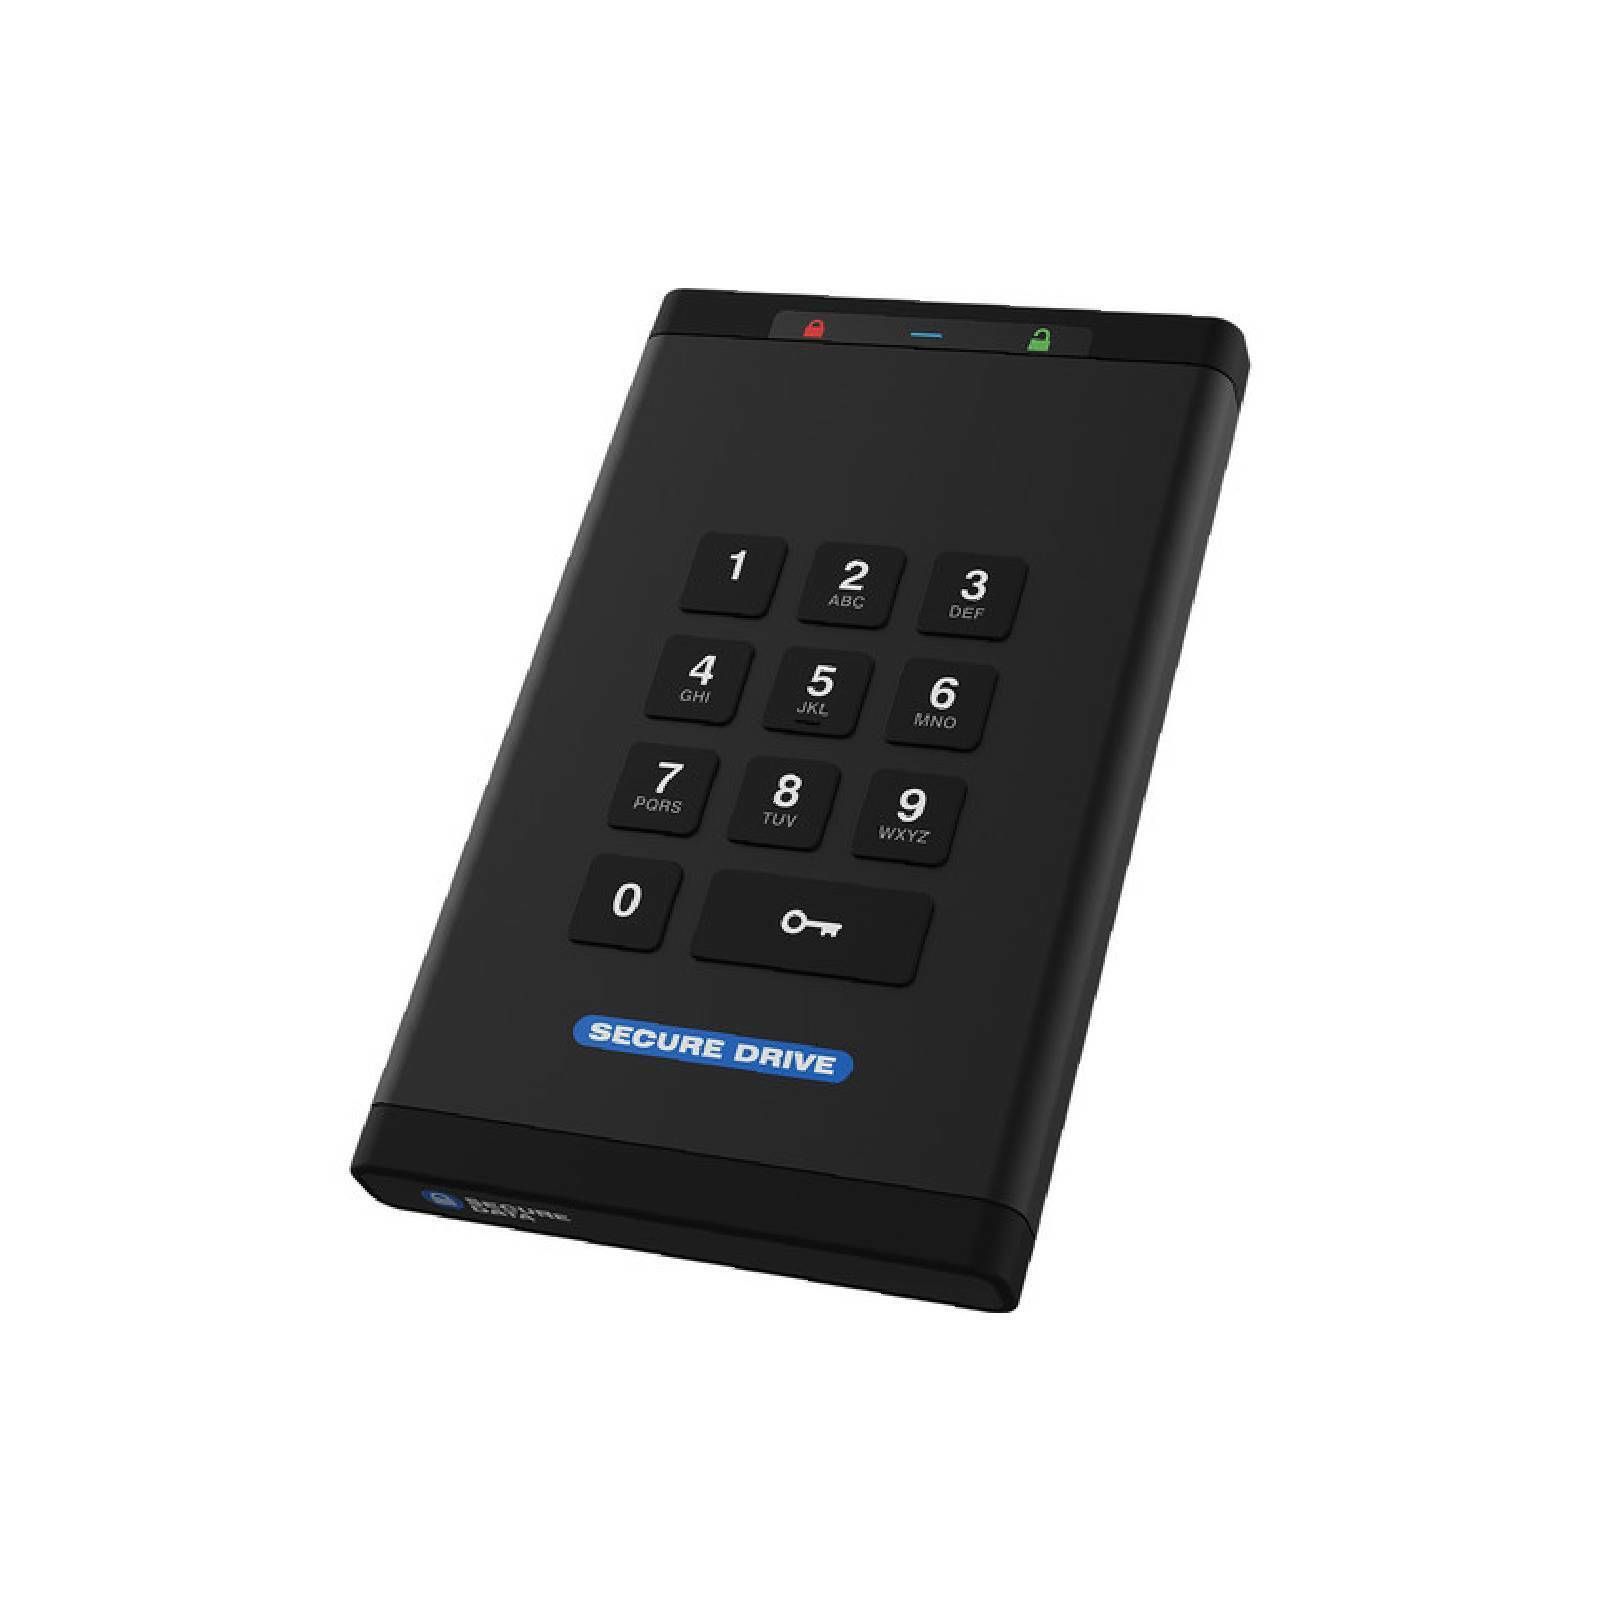 SecureData SecureDrive KP 250GB Encrypted SSD with Keypad Authentication